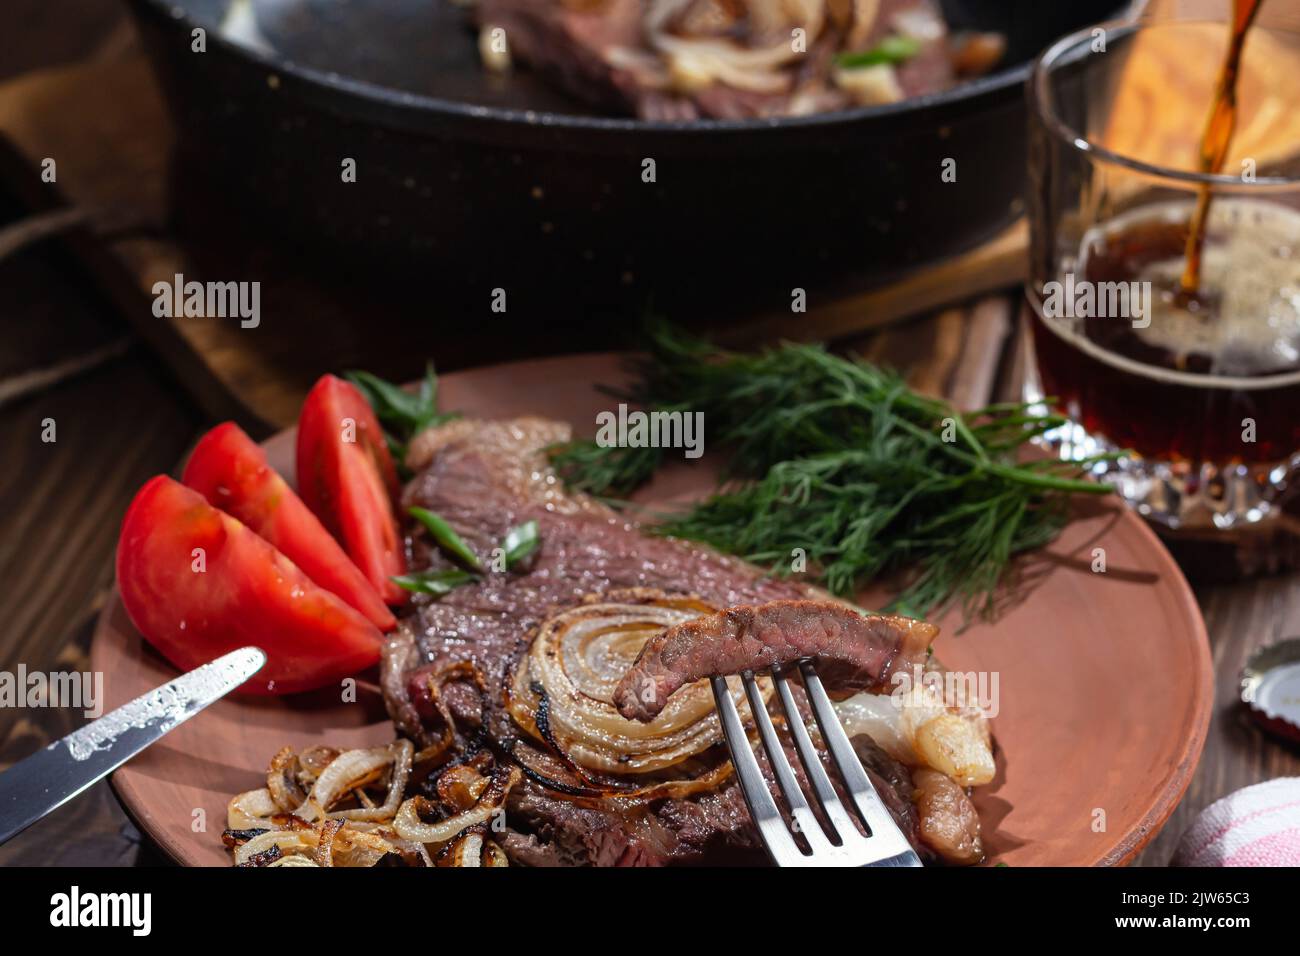 Two fried beef steaks.Focus on piece of meat strung on fork, beer poured into glass, selective focus.Healthy food concept. Stock Photo